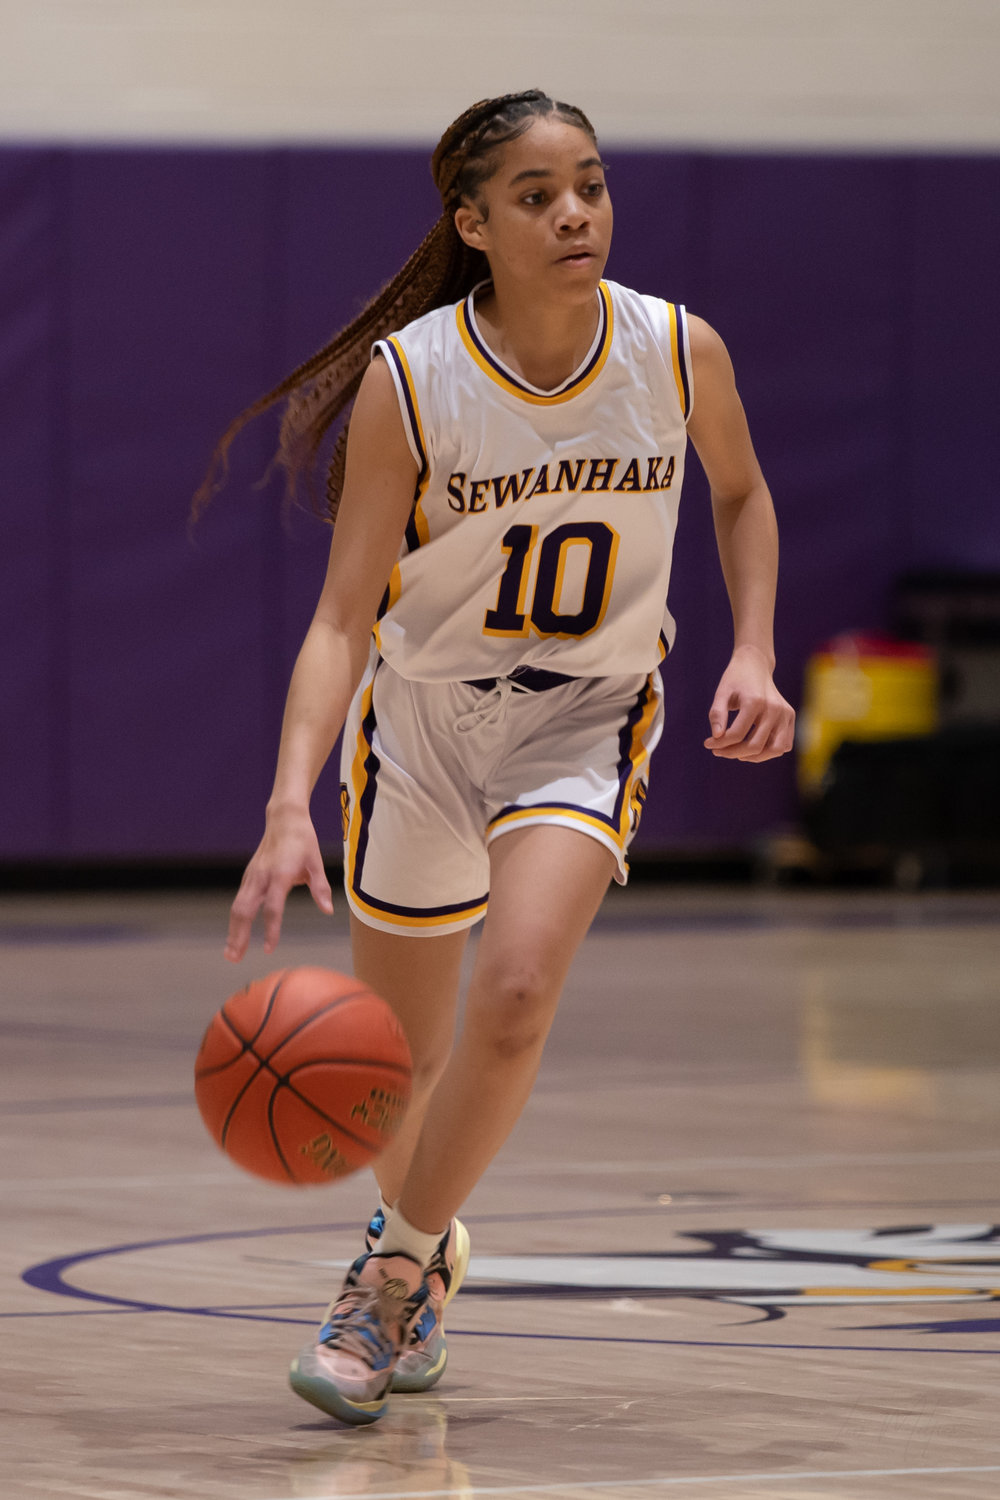 Eighth-grader Alexi Stewart not only cracked Sewanhaka's starting five but emerged as its top scorer at 9.8 points per game.